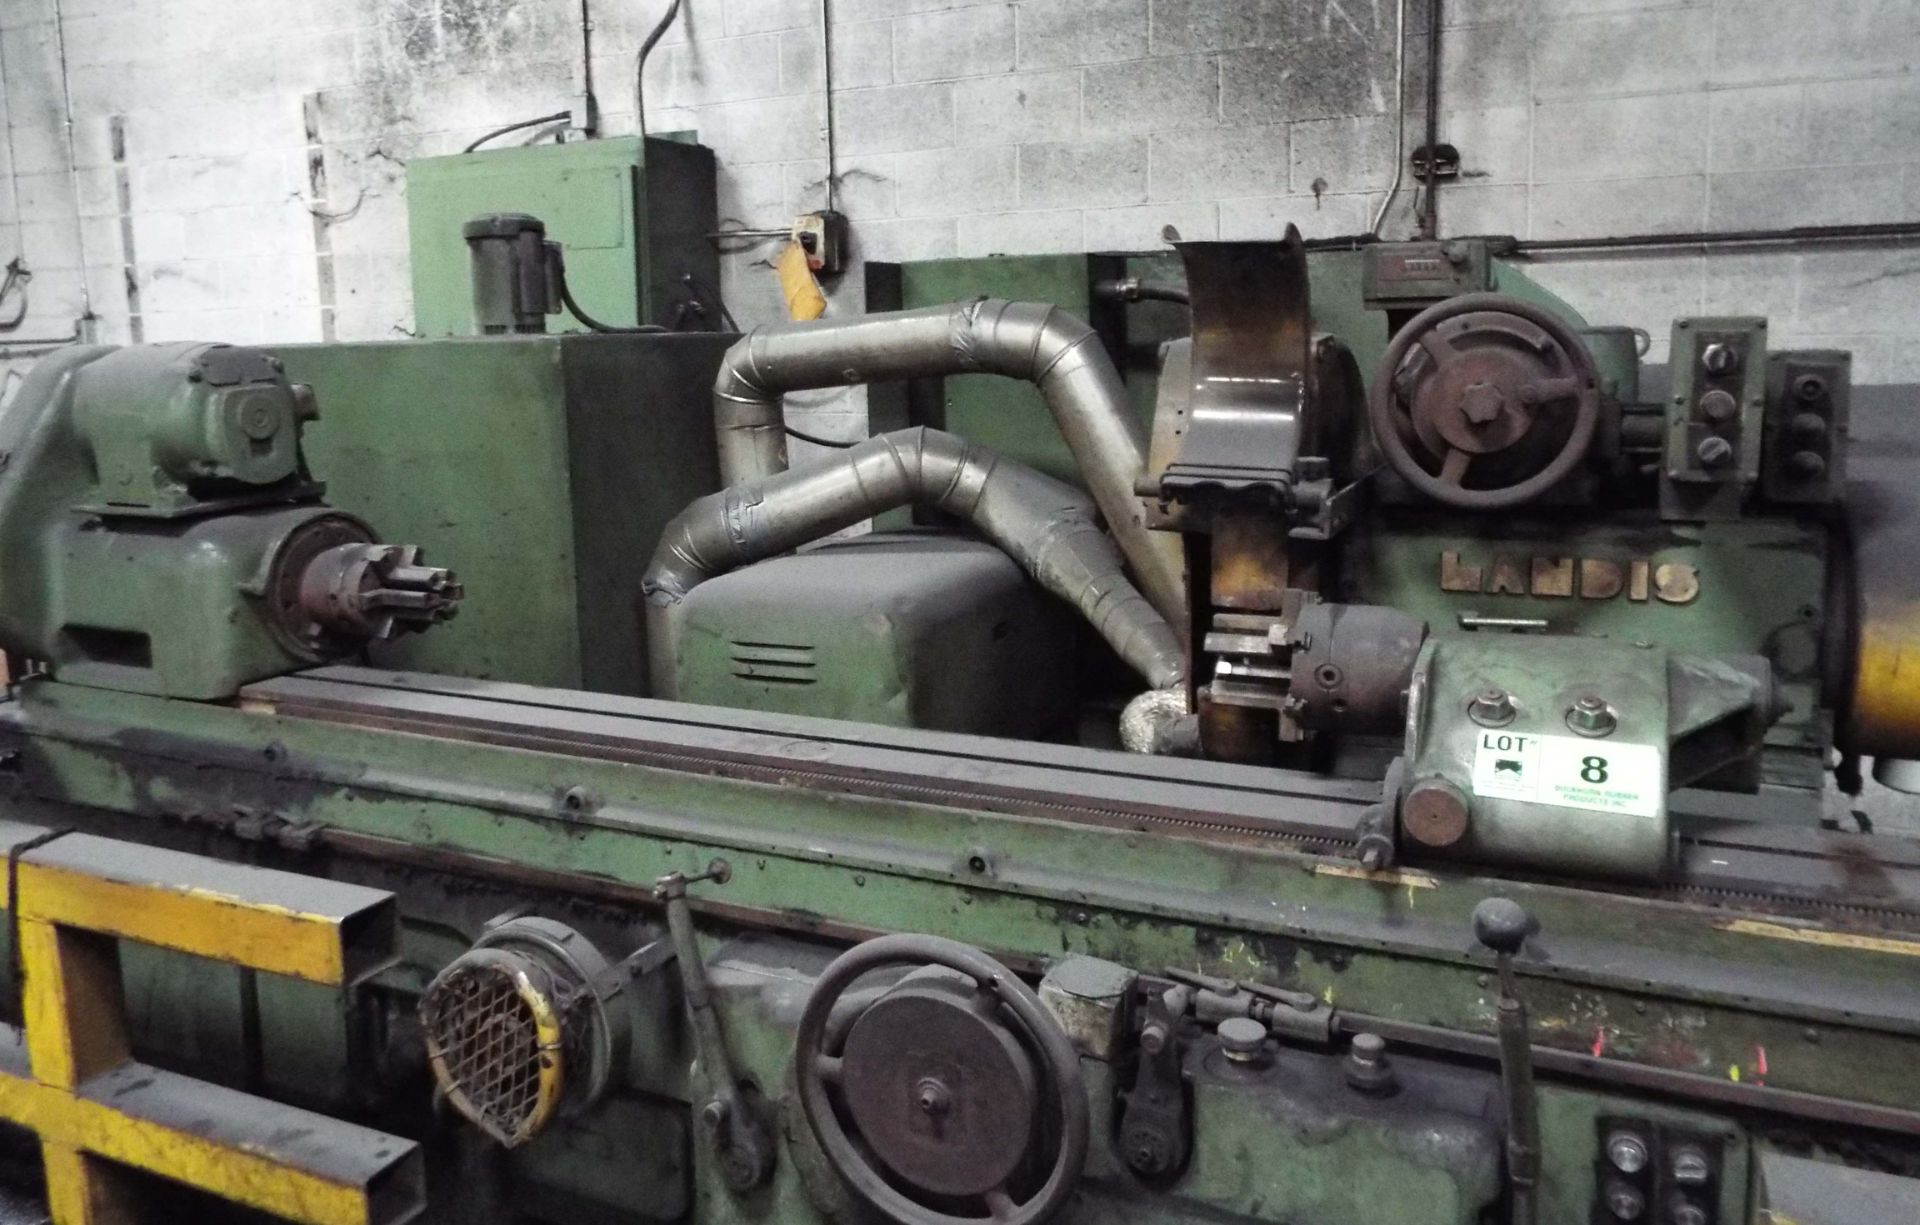 LANDIS 10X96 CYLINDRICAL GRINDER WITH 10" SWING OVER TABLE, 96" BETWEEN CENTERS, 28" DIAMETER WHEEL, - Image 3 of 3